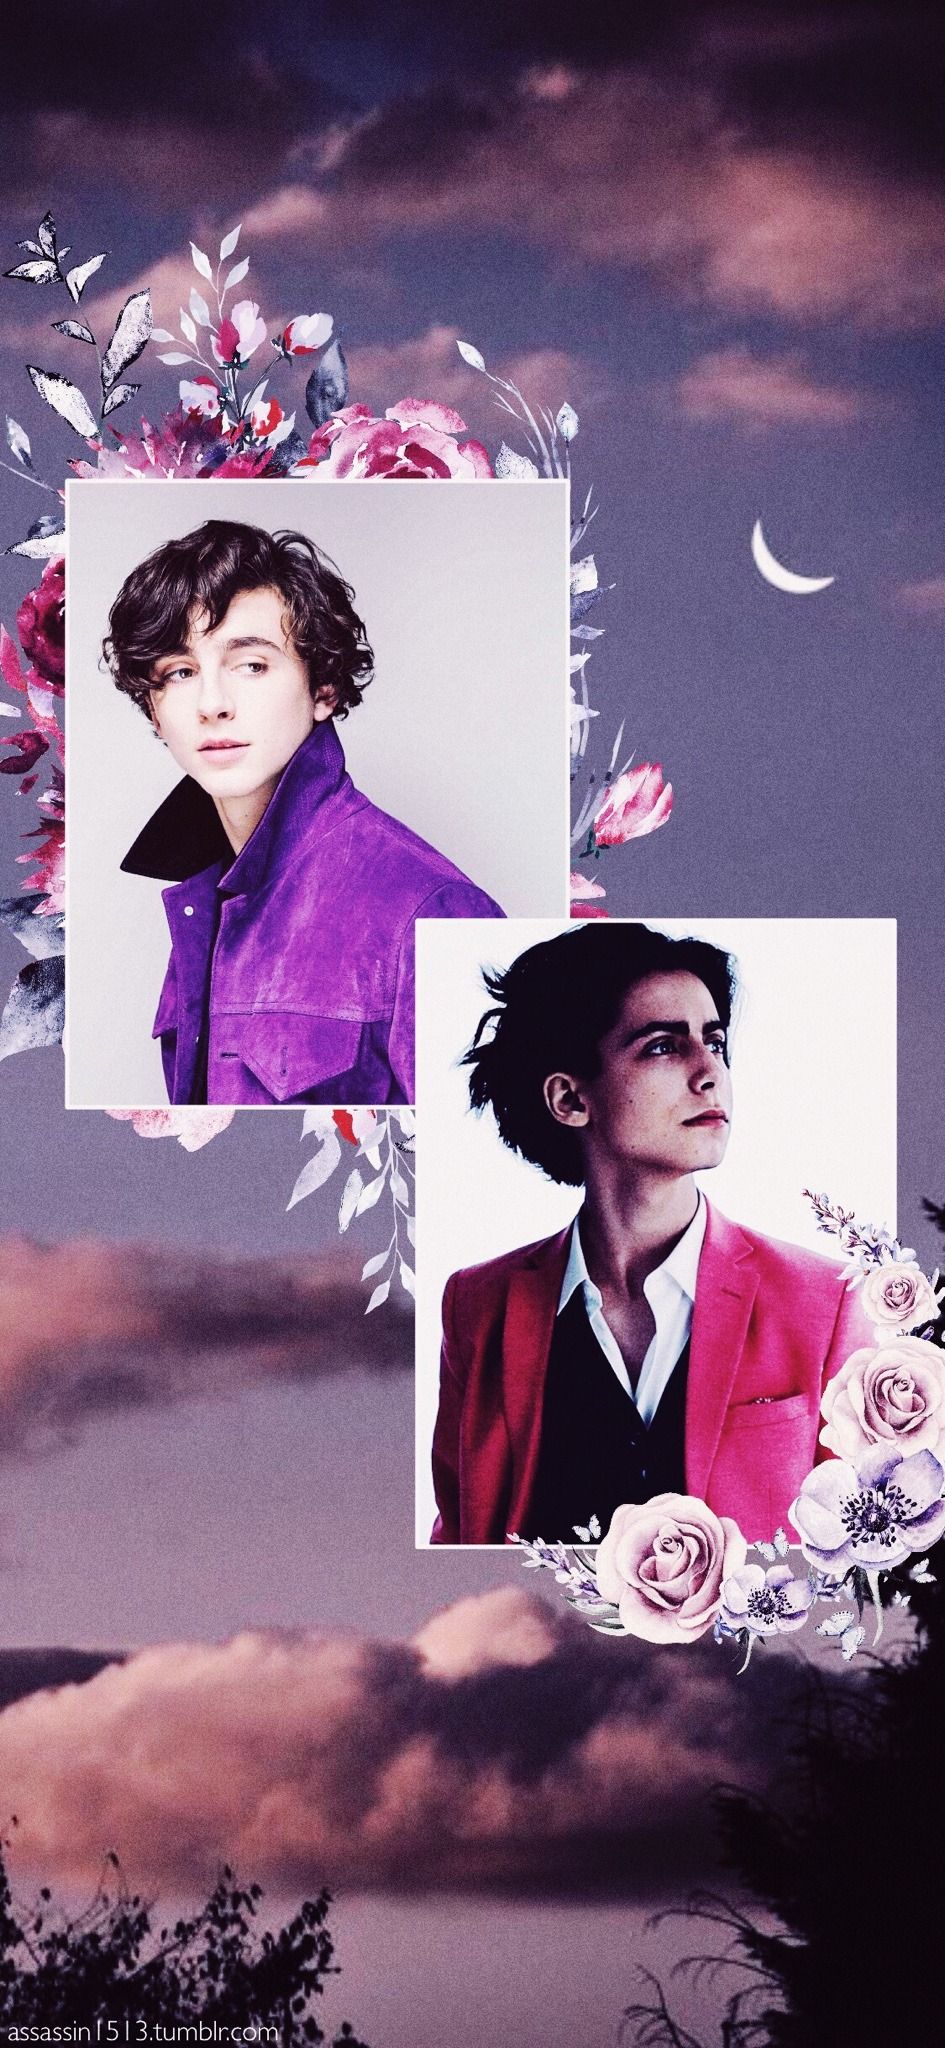 A picture of two people with flowers - Timothee Chalamet